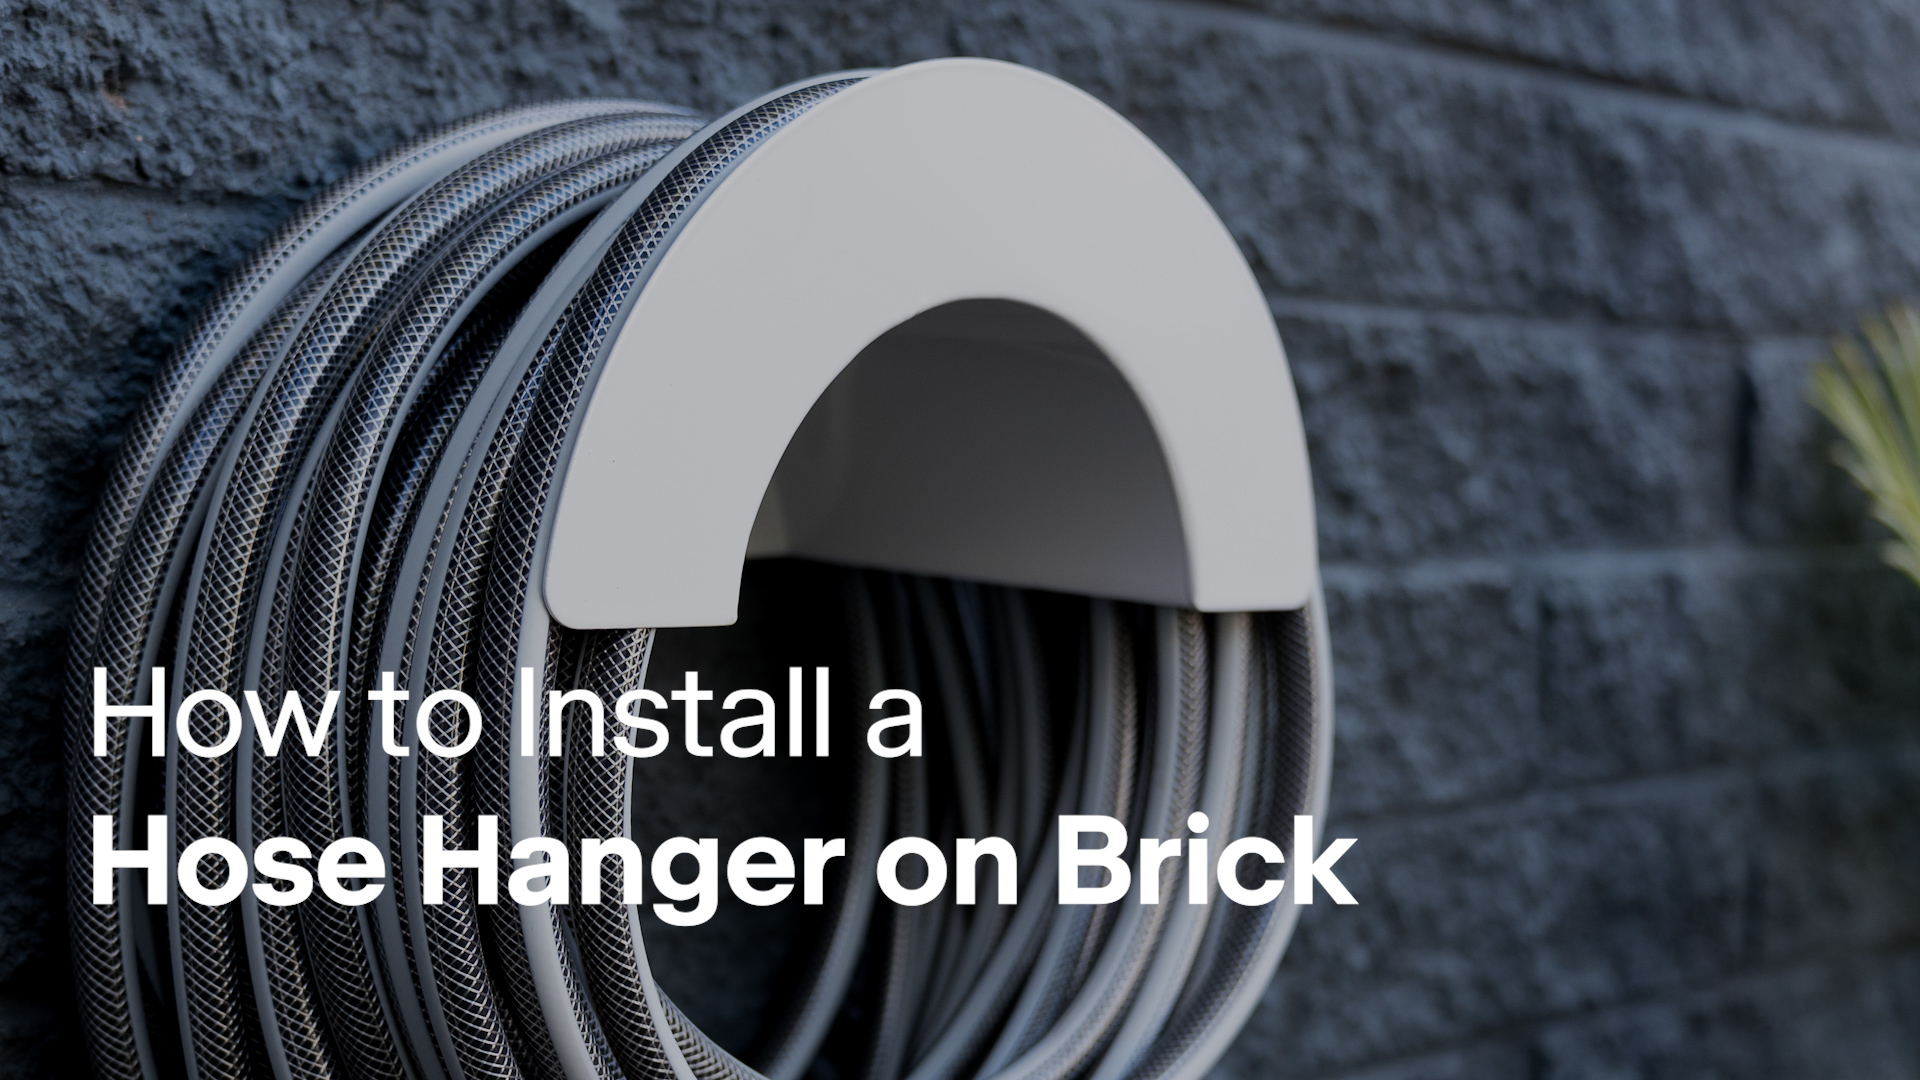 How to install a hose hanger on brick